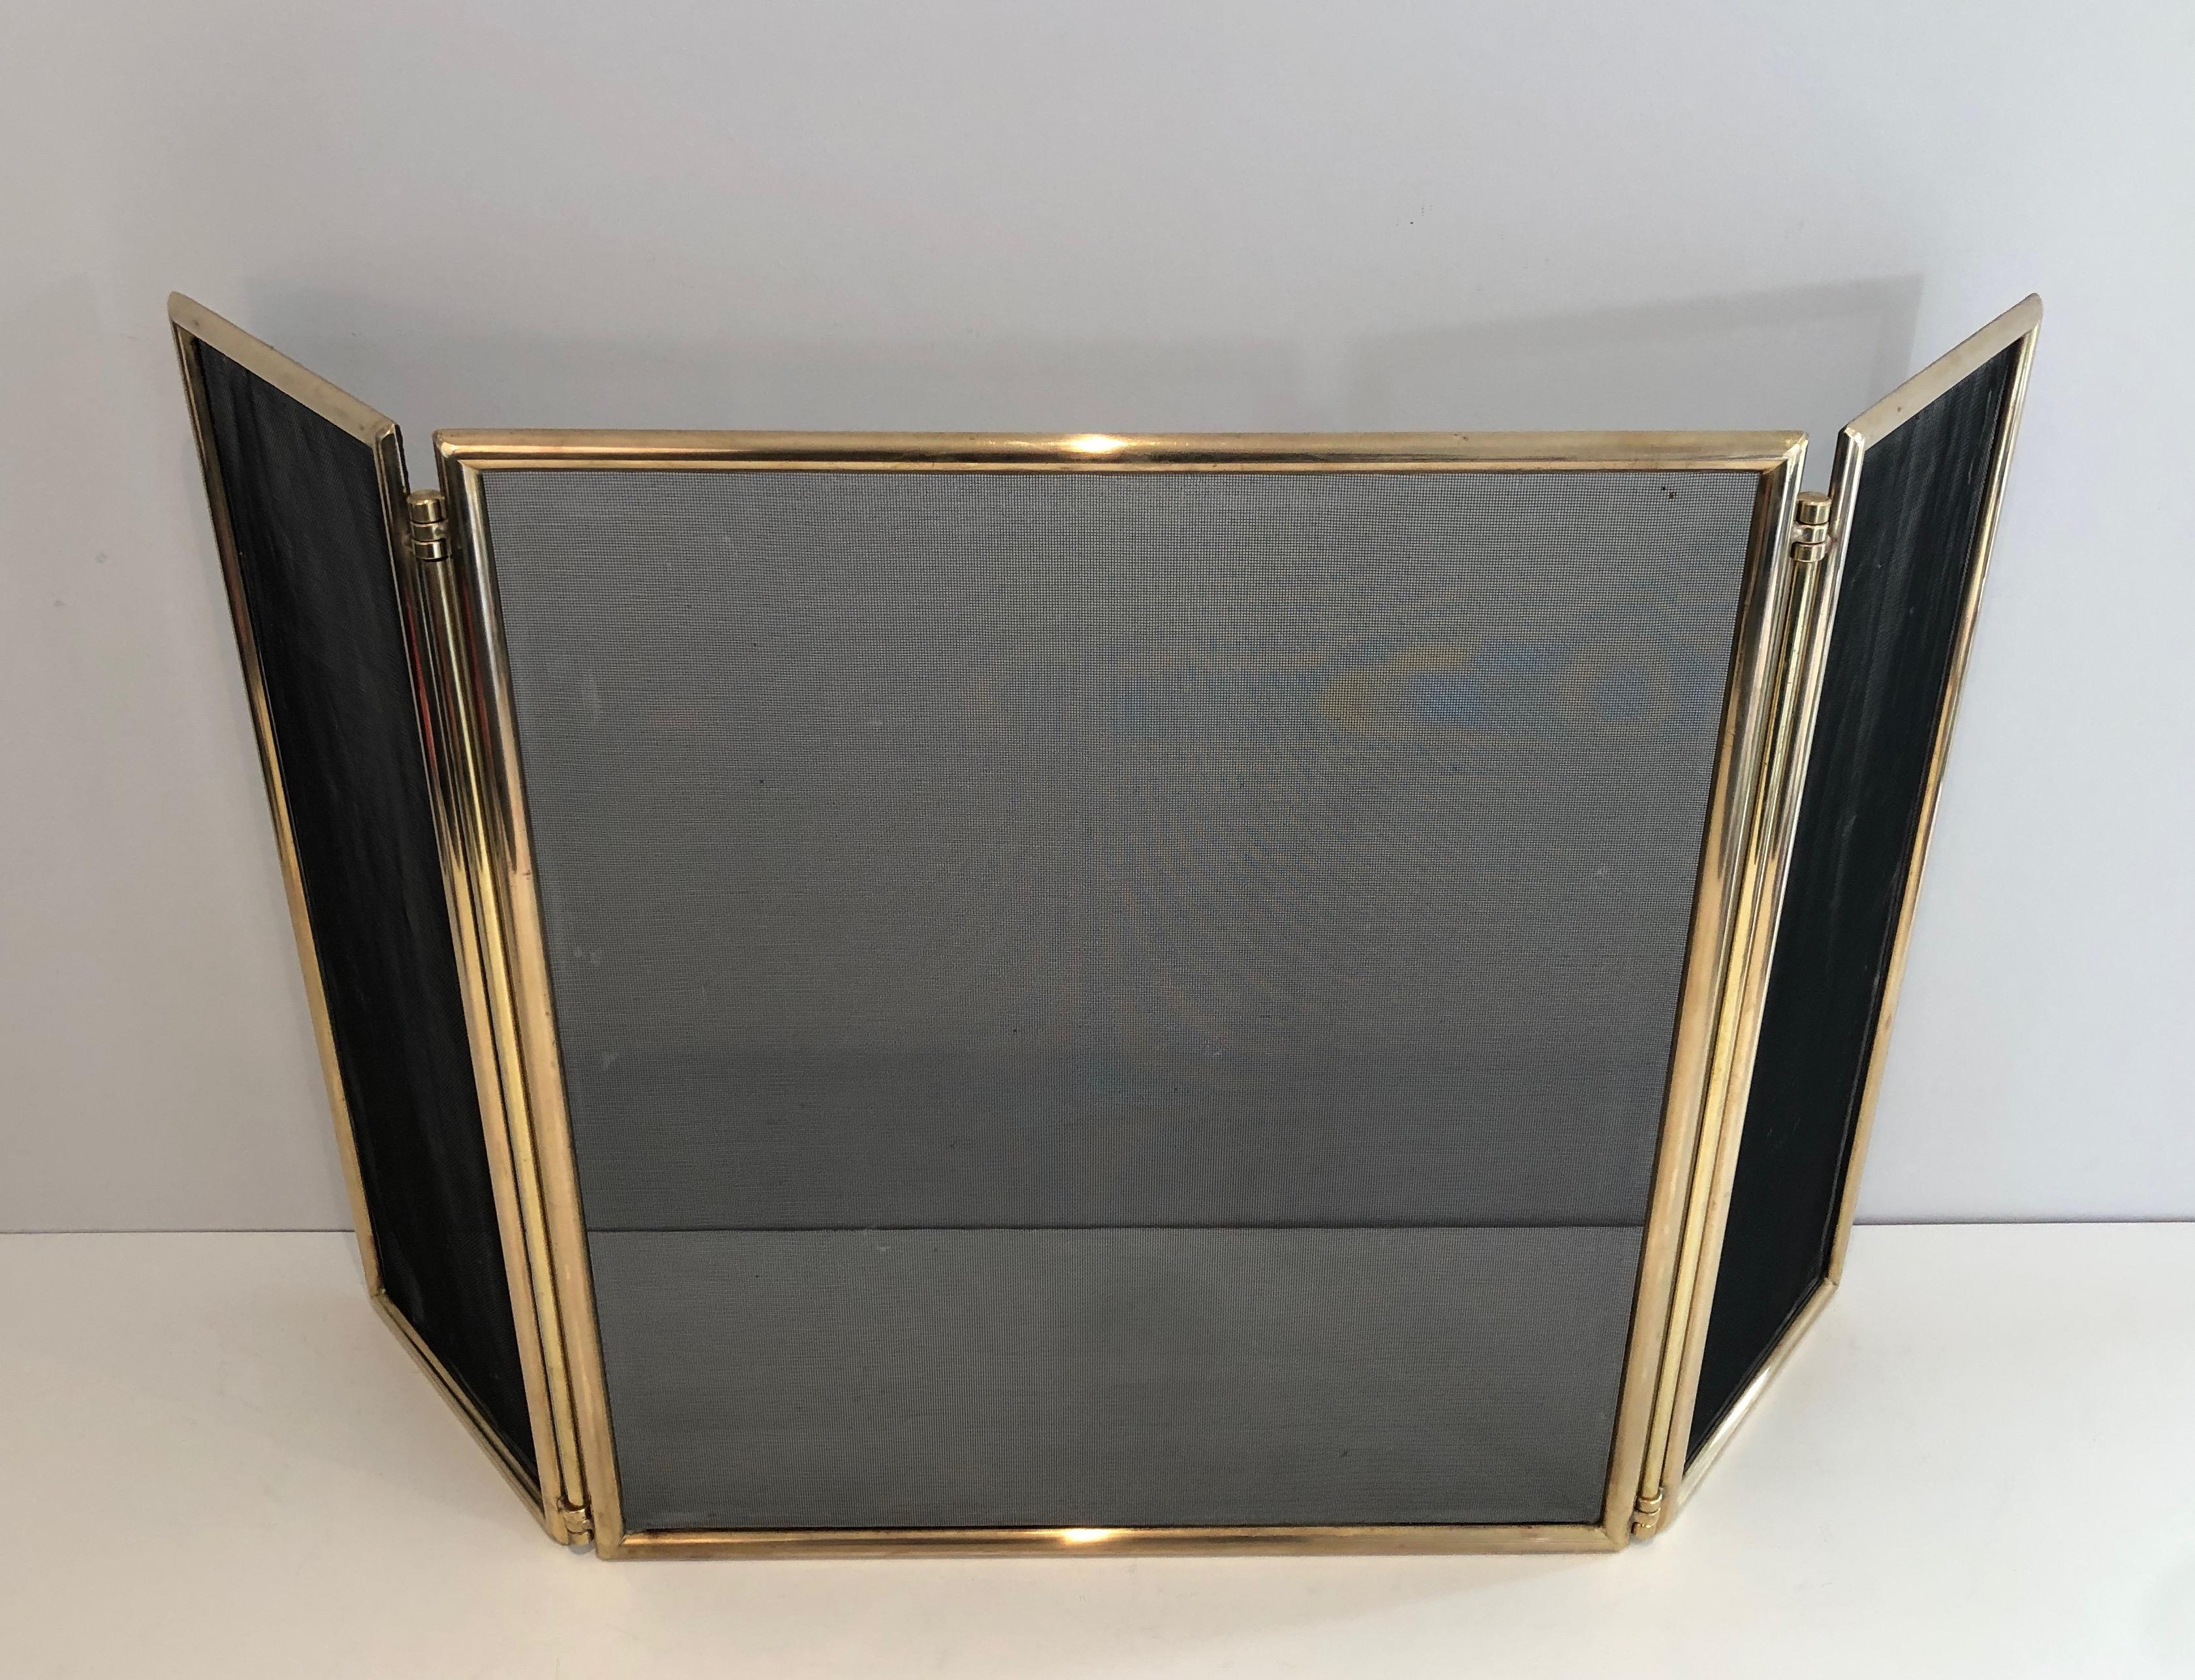 This nice neoclassical style folding fireplace screen is made of brass and grilling. This is a French work, circa 1970.